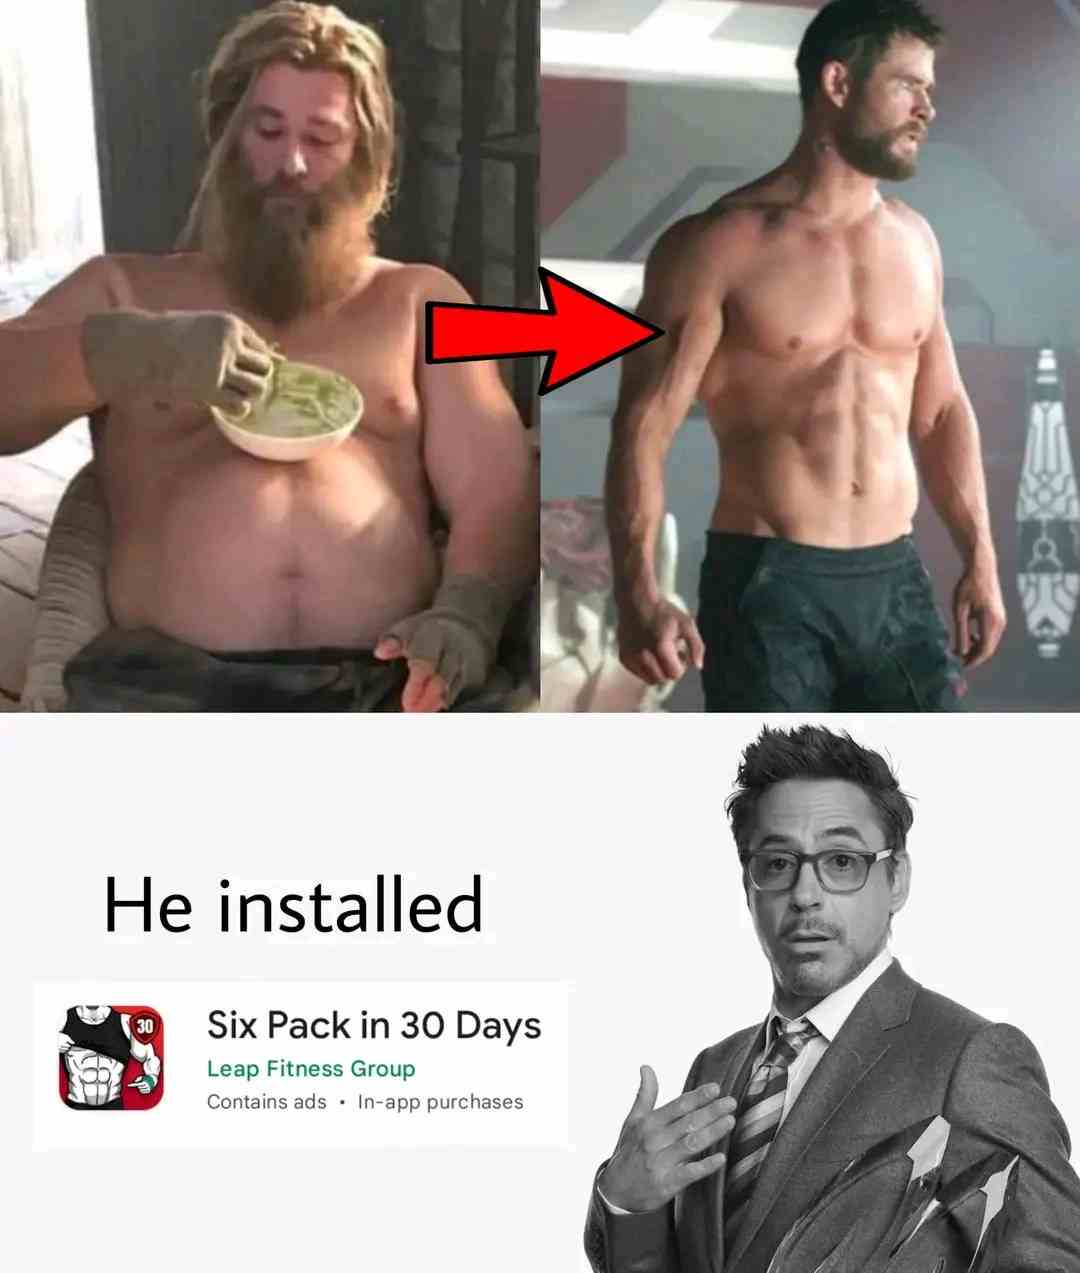 Installed six pack in 30 days